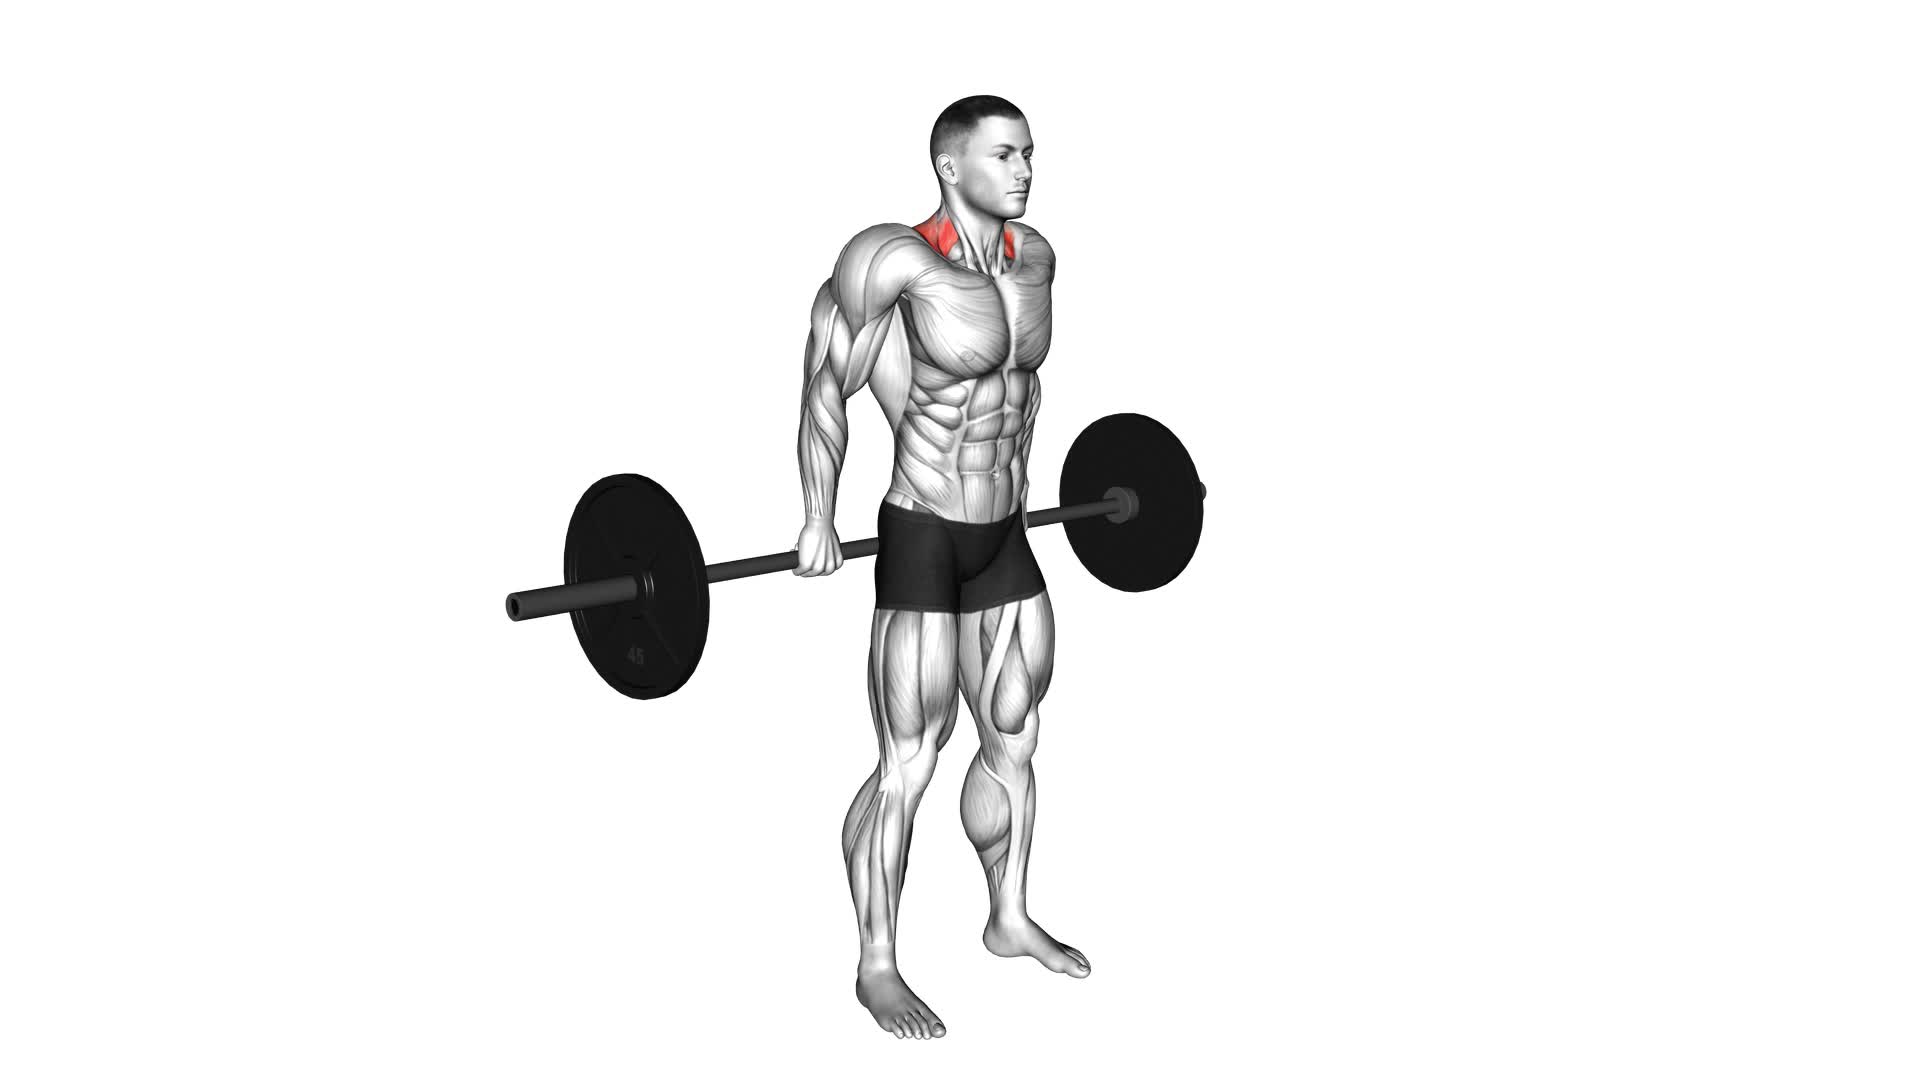 Barbell Behind The Back Shrug - Video Exercise Guide & Tips